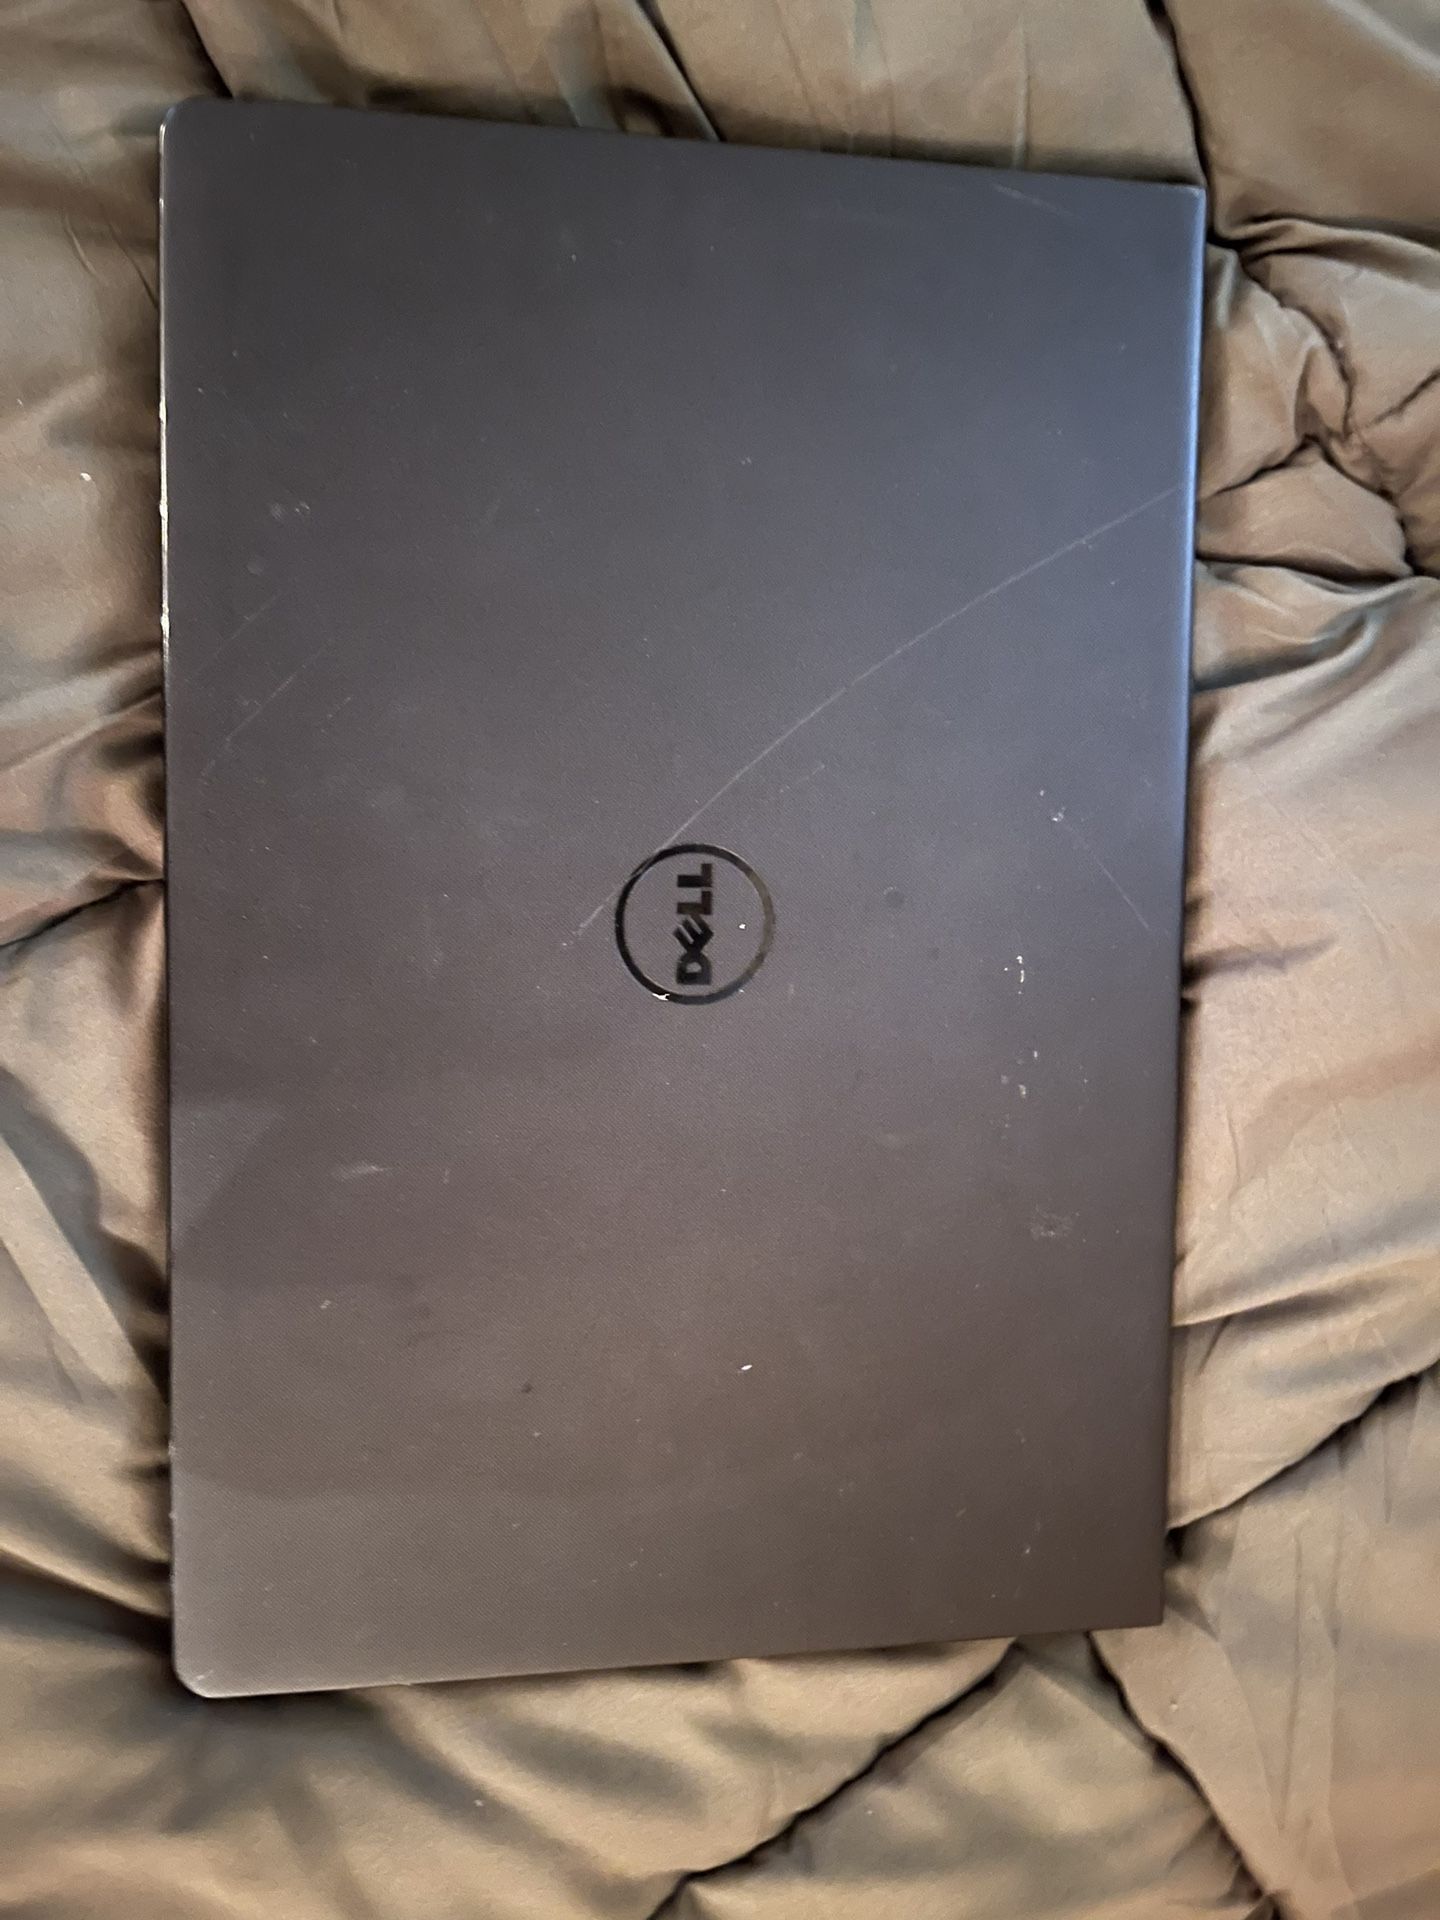 Dell Inspiron 15 3000 Series Laptop